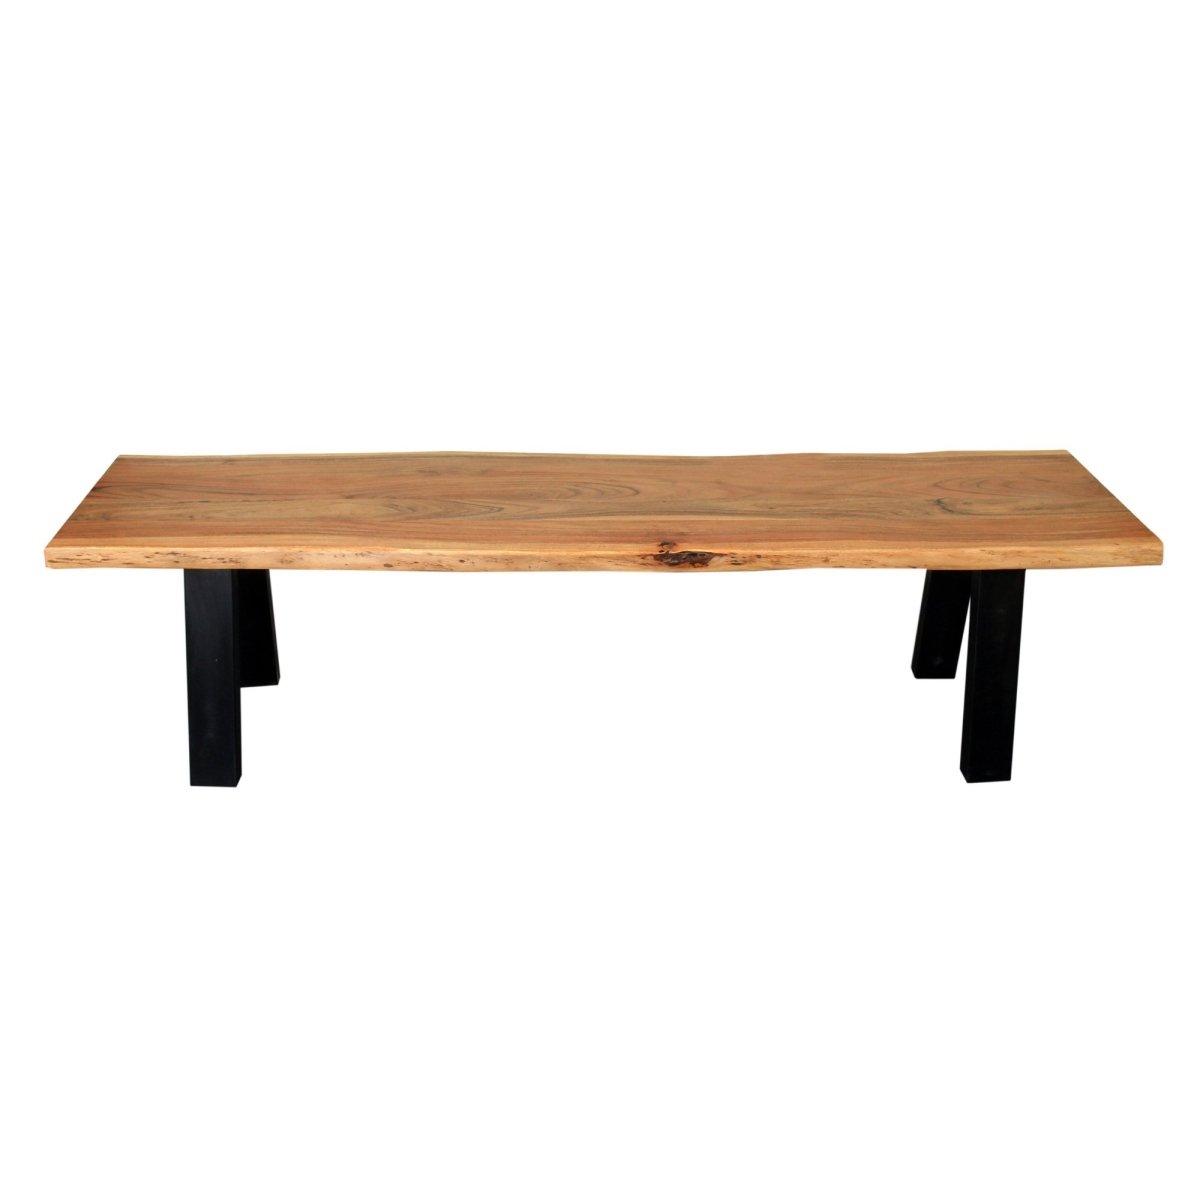 70 inch Sierra Acacia Wood bench - Rustic Furniture Outlet